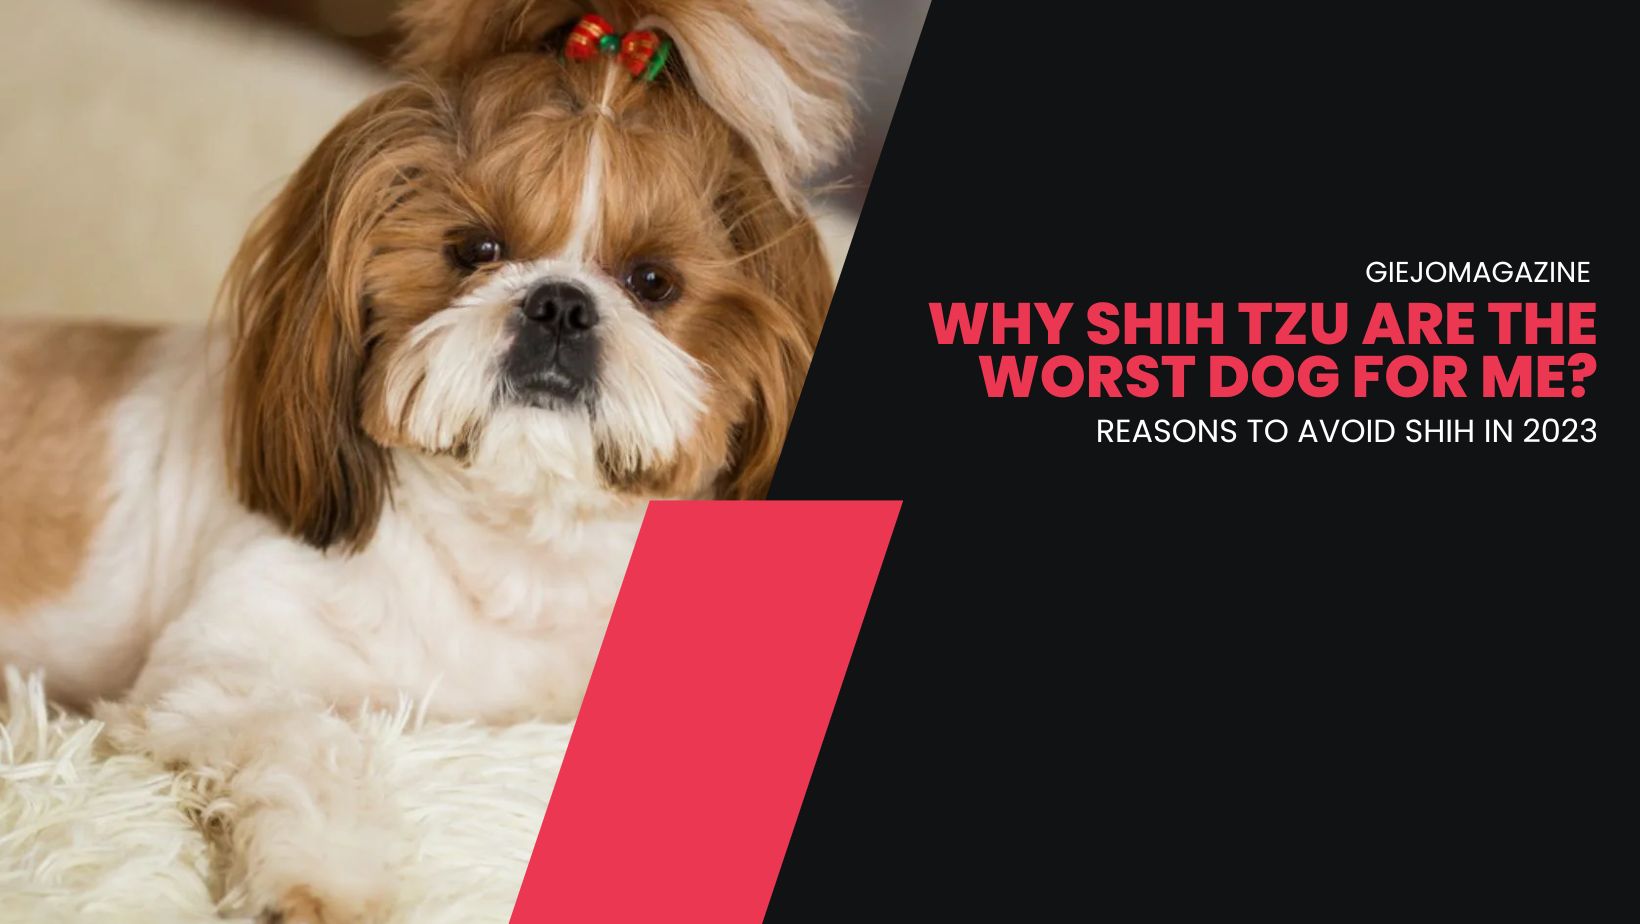 Why Shih TZU Are The Worst Dog for Me? 7 Reasons to Avoid Shih in 2023